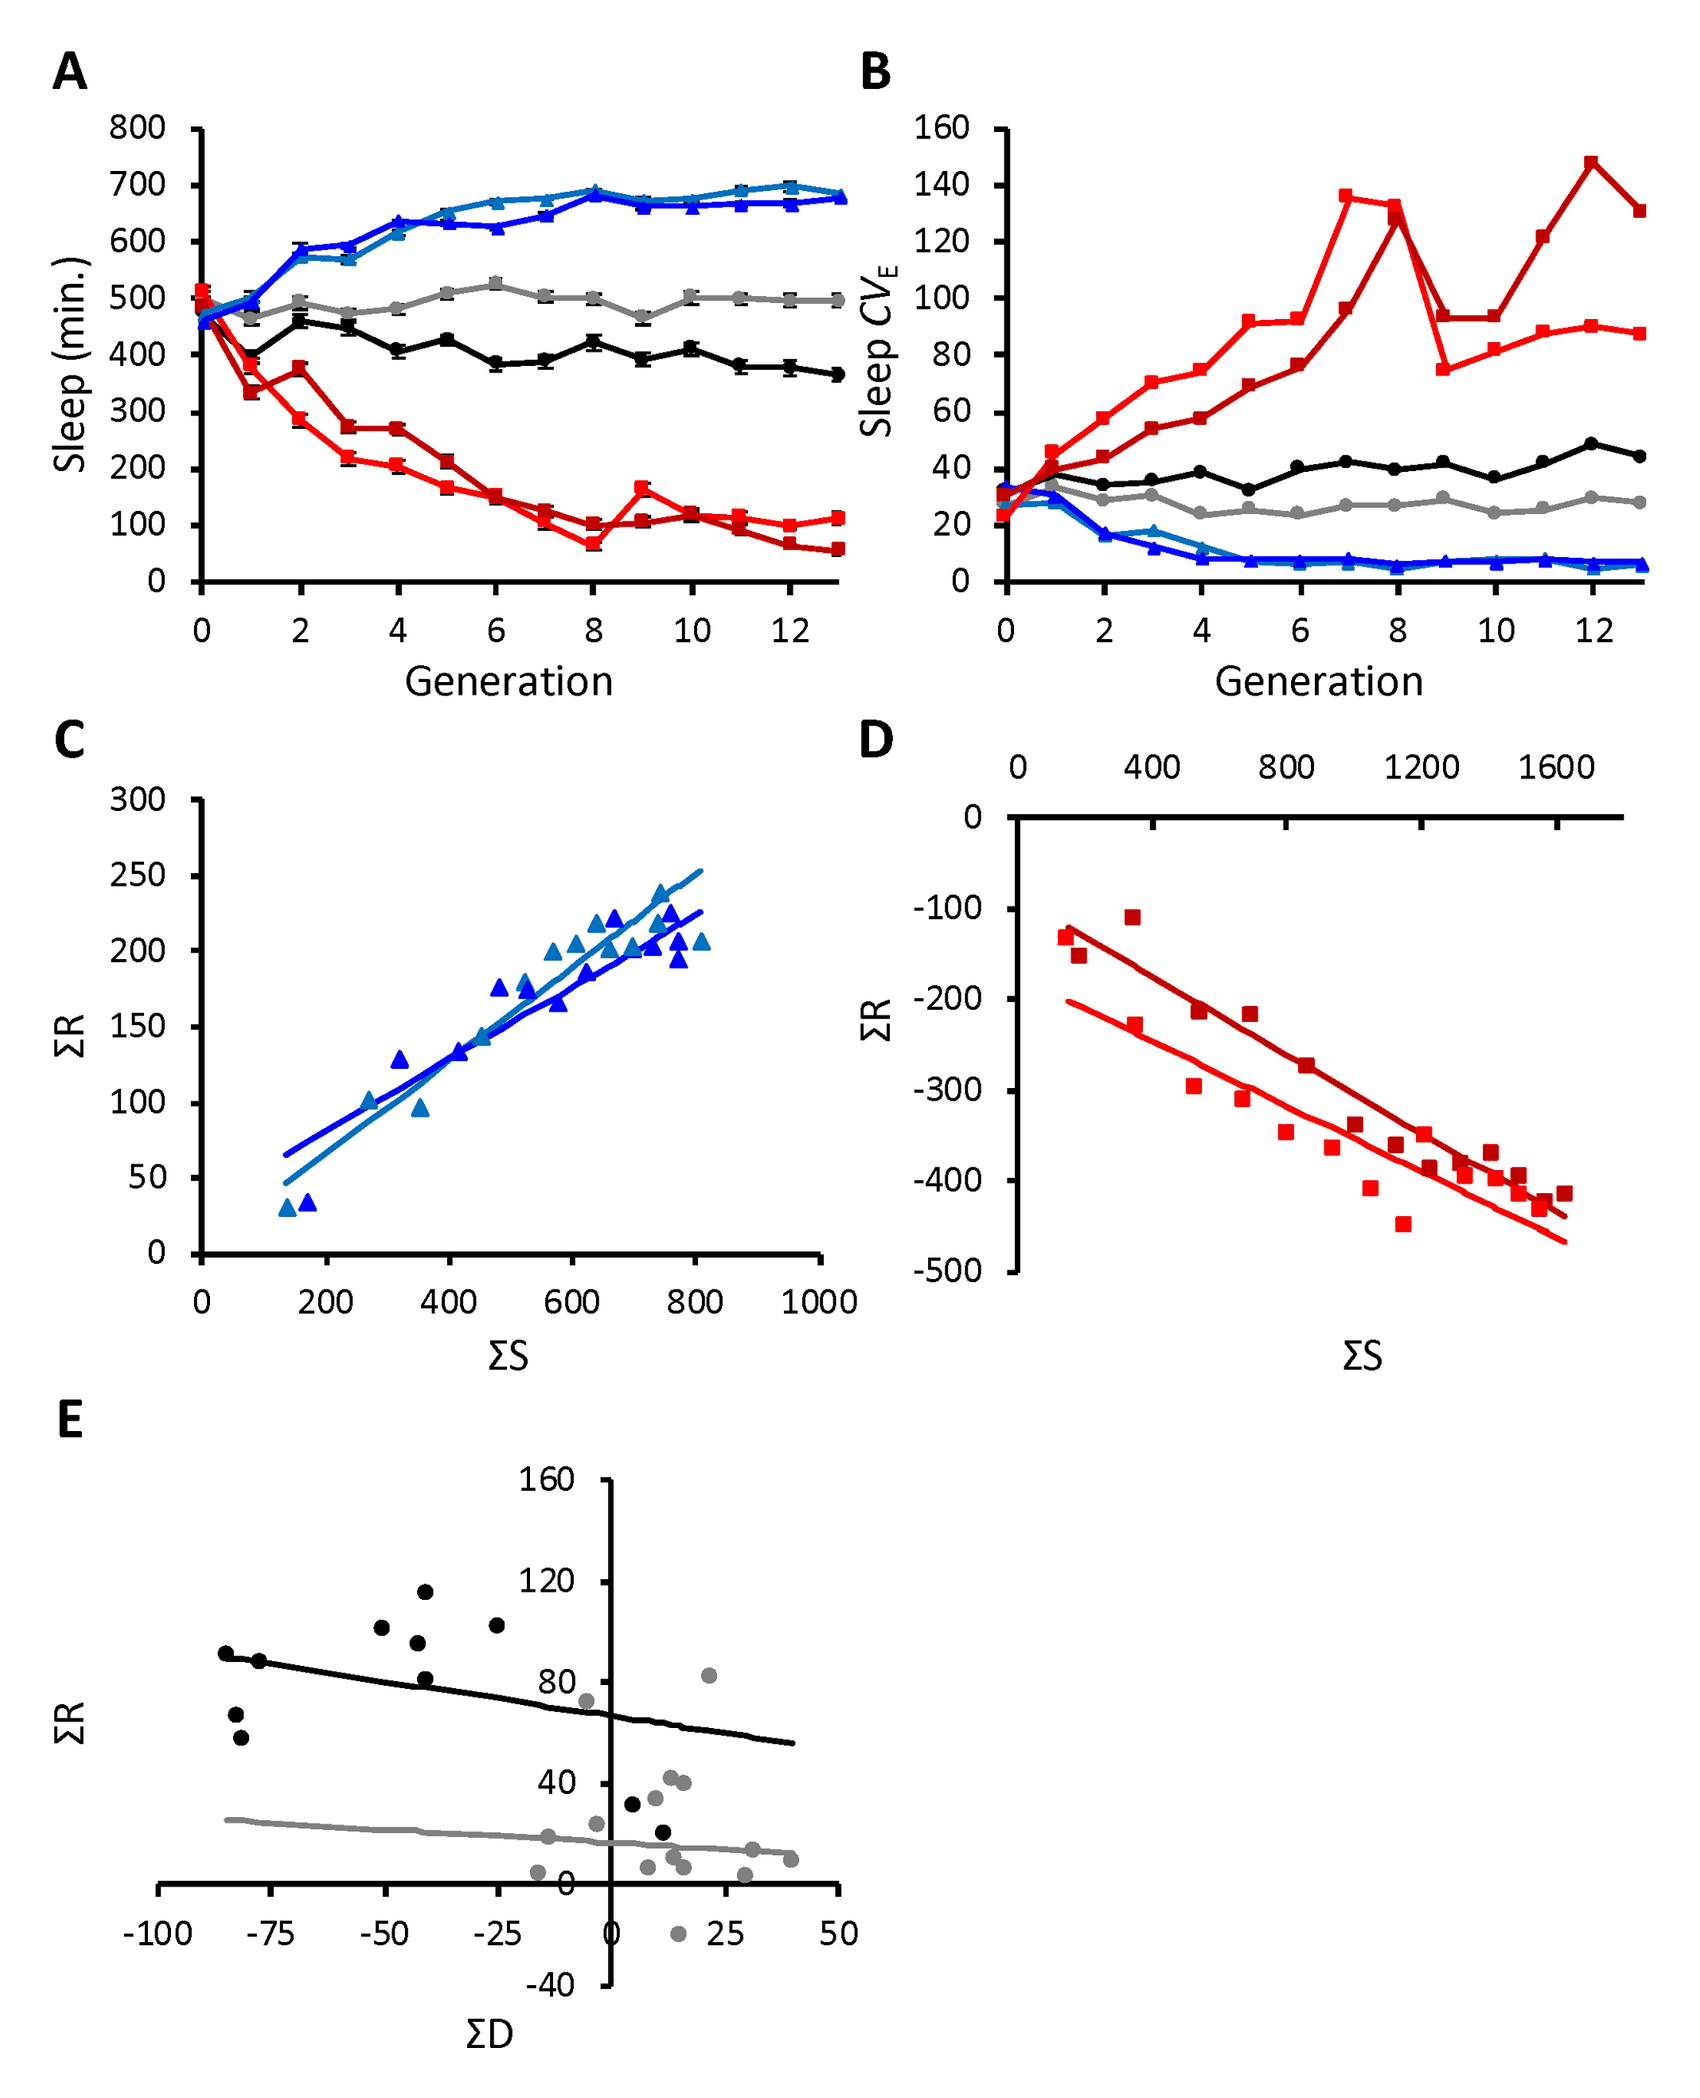 Figure 1: Phenotypic response to artificial selection for night sleep duration. (A), combined-sex average night sleep duration ± SE is plotted for each generation of selection; (B), combined-sex night sleep coefficient of environmental variation (CVE) is plotted for each generation of selection; (C) & (D), combined-sex cumulative selection differential (ΣS) versus combined-sex cumulative response (ΣR) for (C) long sleep and (D) short sleep populations; (E), combined-sex cumulative differential (ΣD) versus combined-sex cumulative response (ΣR) for the control populations. Light blue and dark blue triangles indicate Replicate 1 and Replicate 2 populations selected for long sleep; Light red and dark red squares indicate Replicate 1 and Replicate 2 populations selected for short sleep; and light gray and black circles indicate Replicate 1 and Replicate 2 control populations.